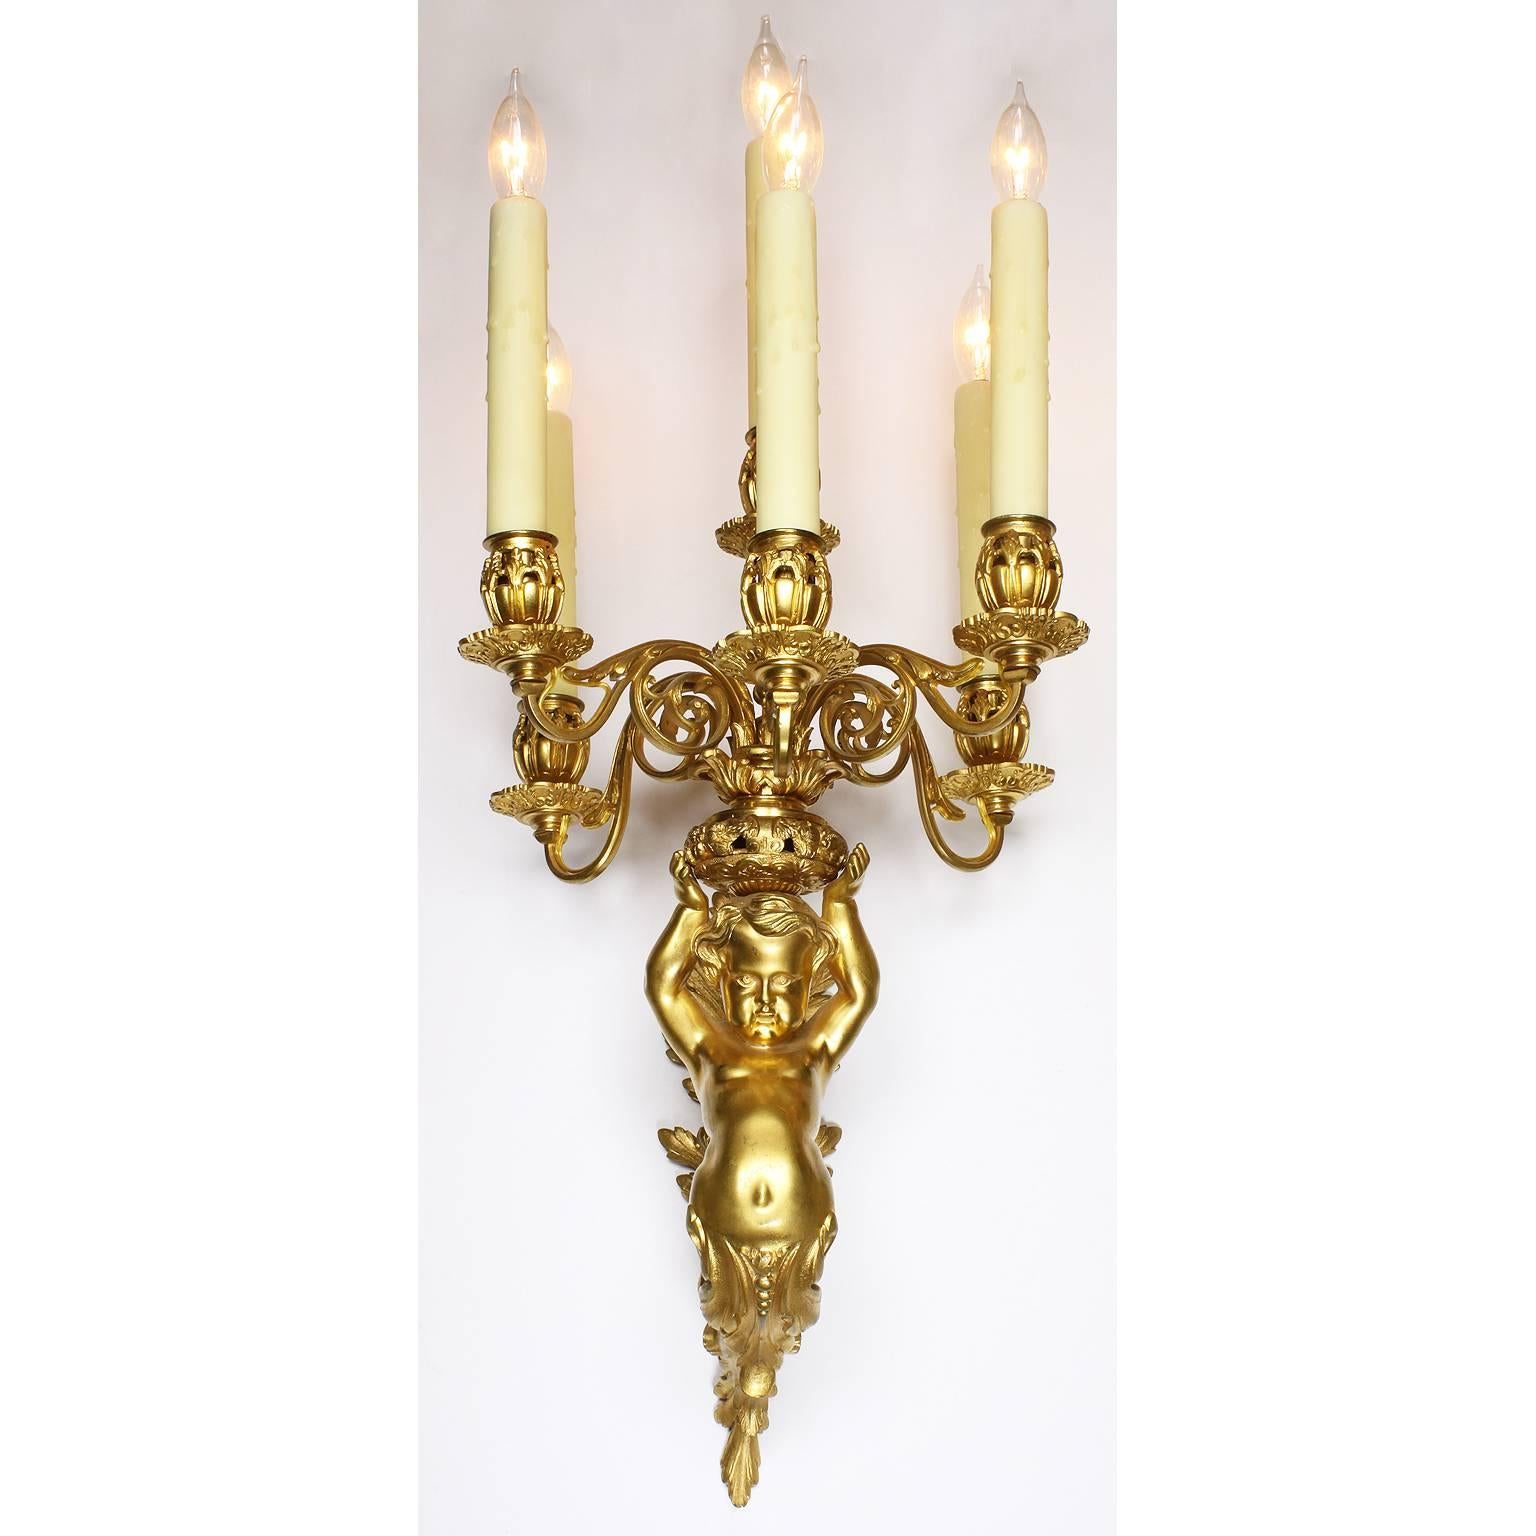 A very fine pair of French Belle Époque Louis XV style gilt bronze figural six-light wall sconces, each with a figure of a putto (child) with his arms raised holding a candelabrum, Paris, circa 1900.

Overall height (top of light bulbs) 28 1/4